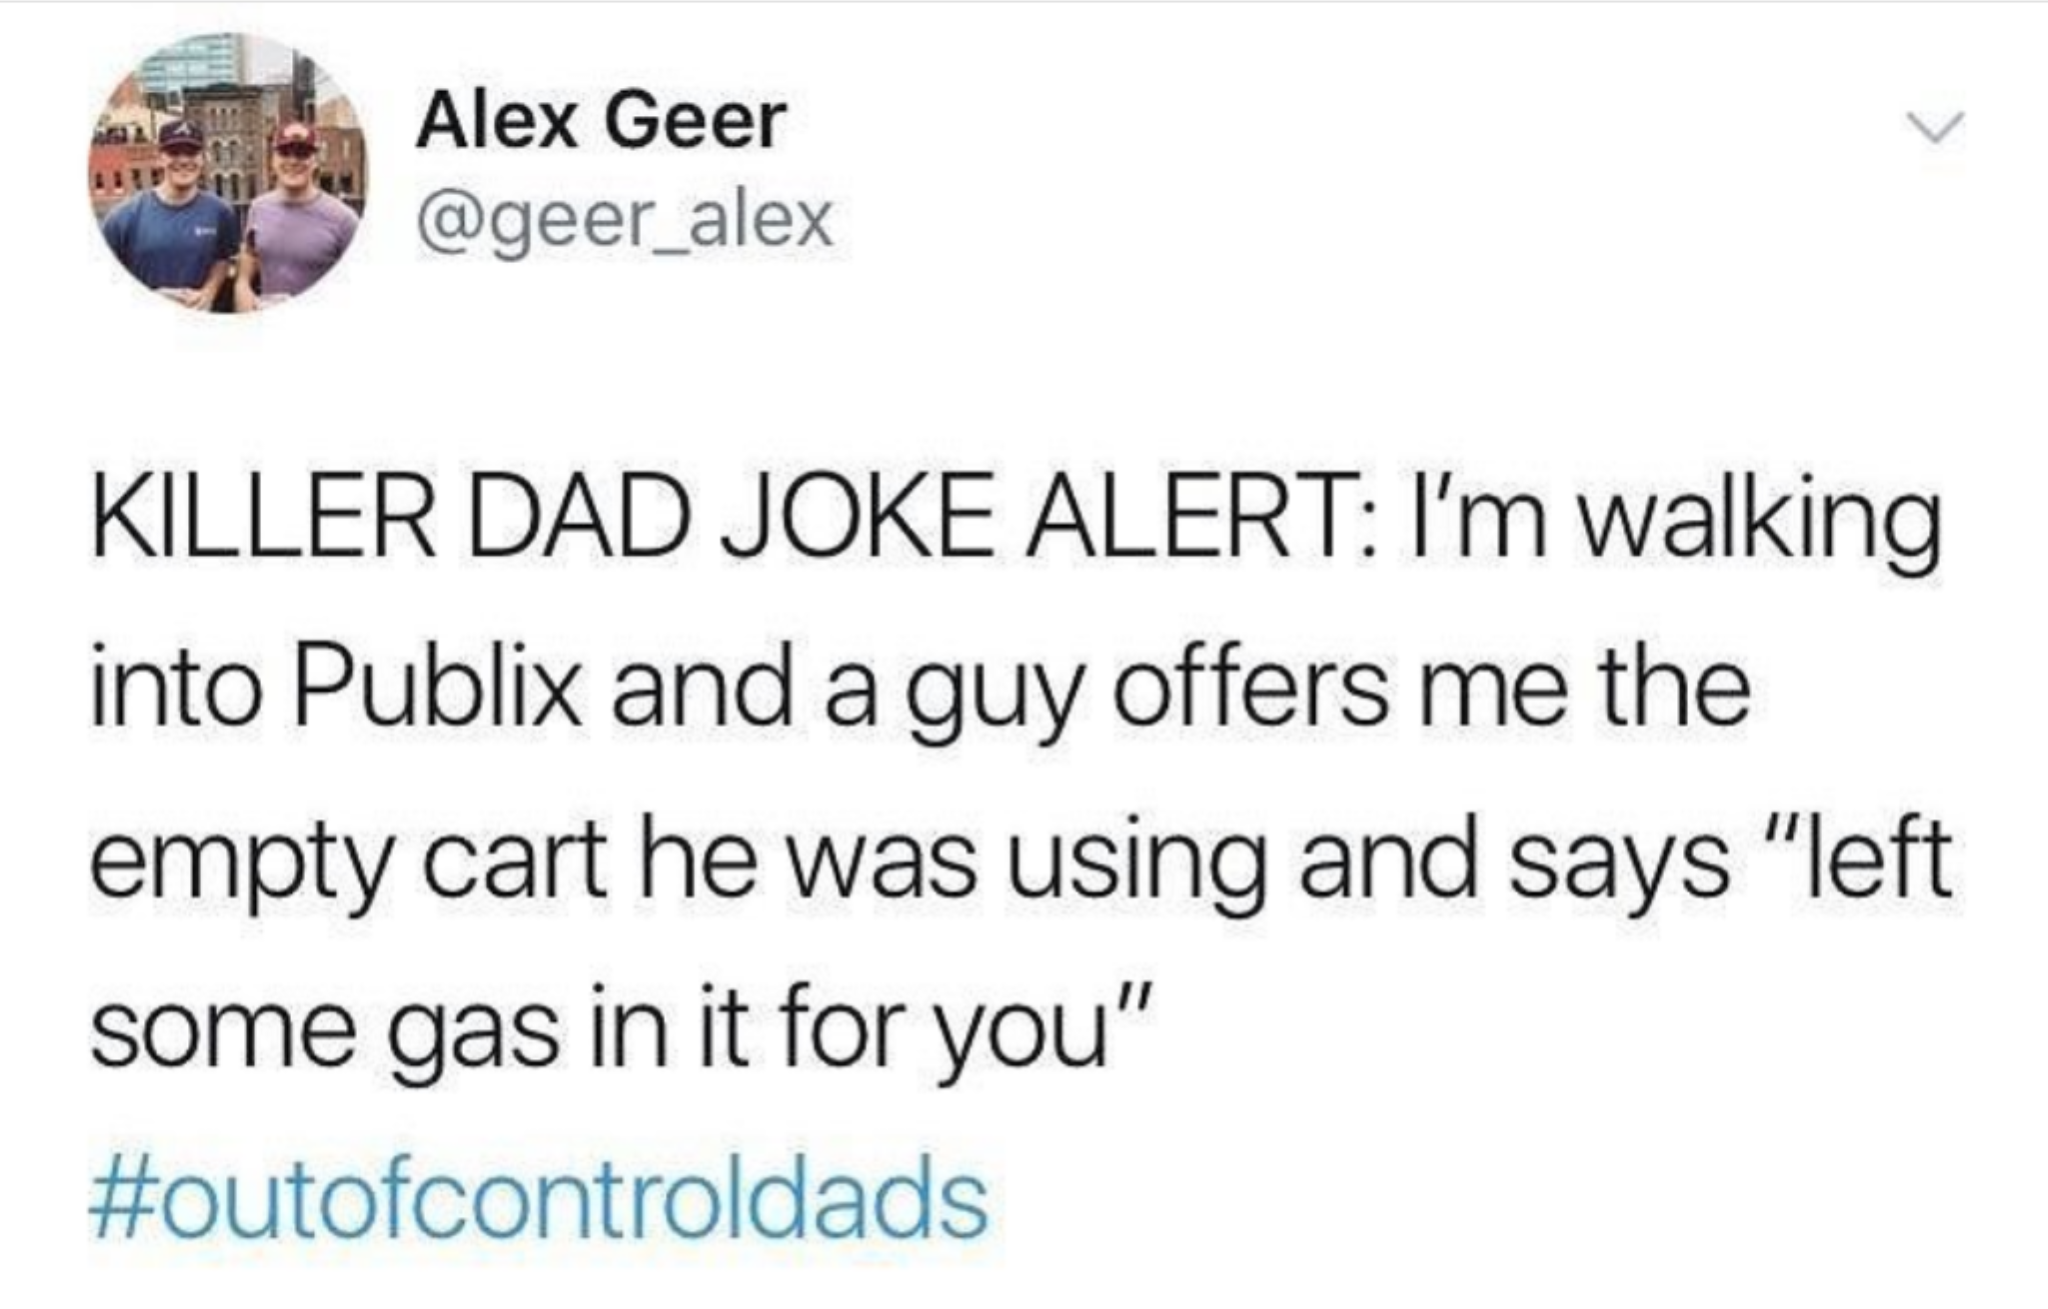 funny twitter moments - Alex Geer Killer Dad Joke Alert I'm walking into Publix and a guy offers me the empty cart he was using and says "left some gas in it for you"